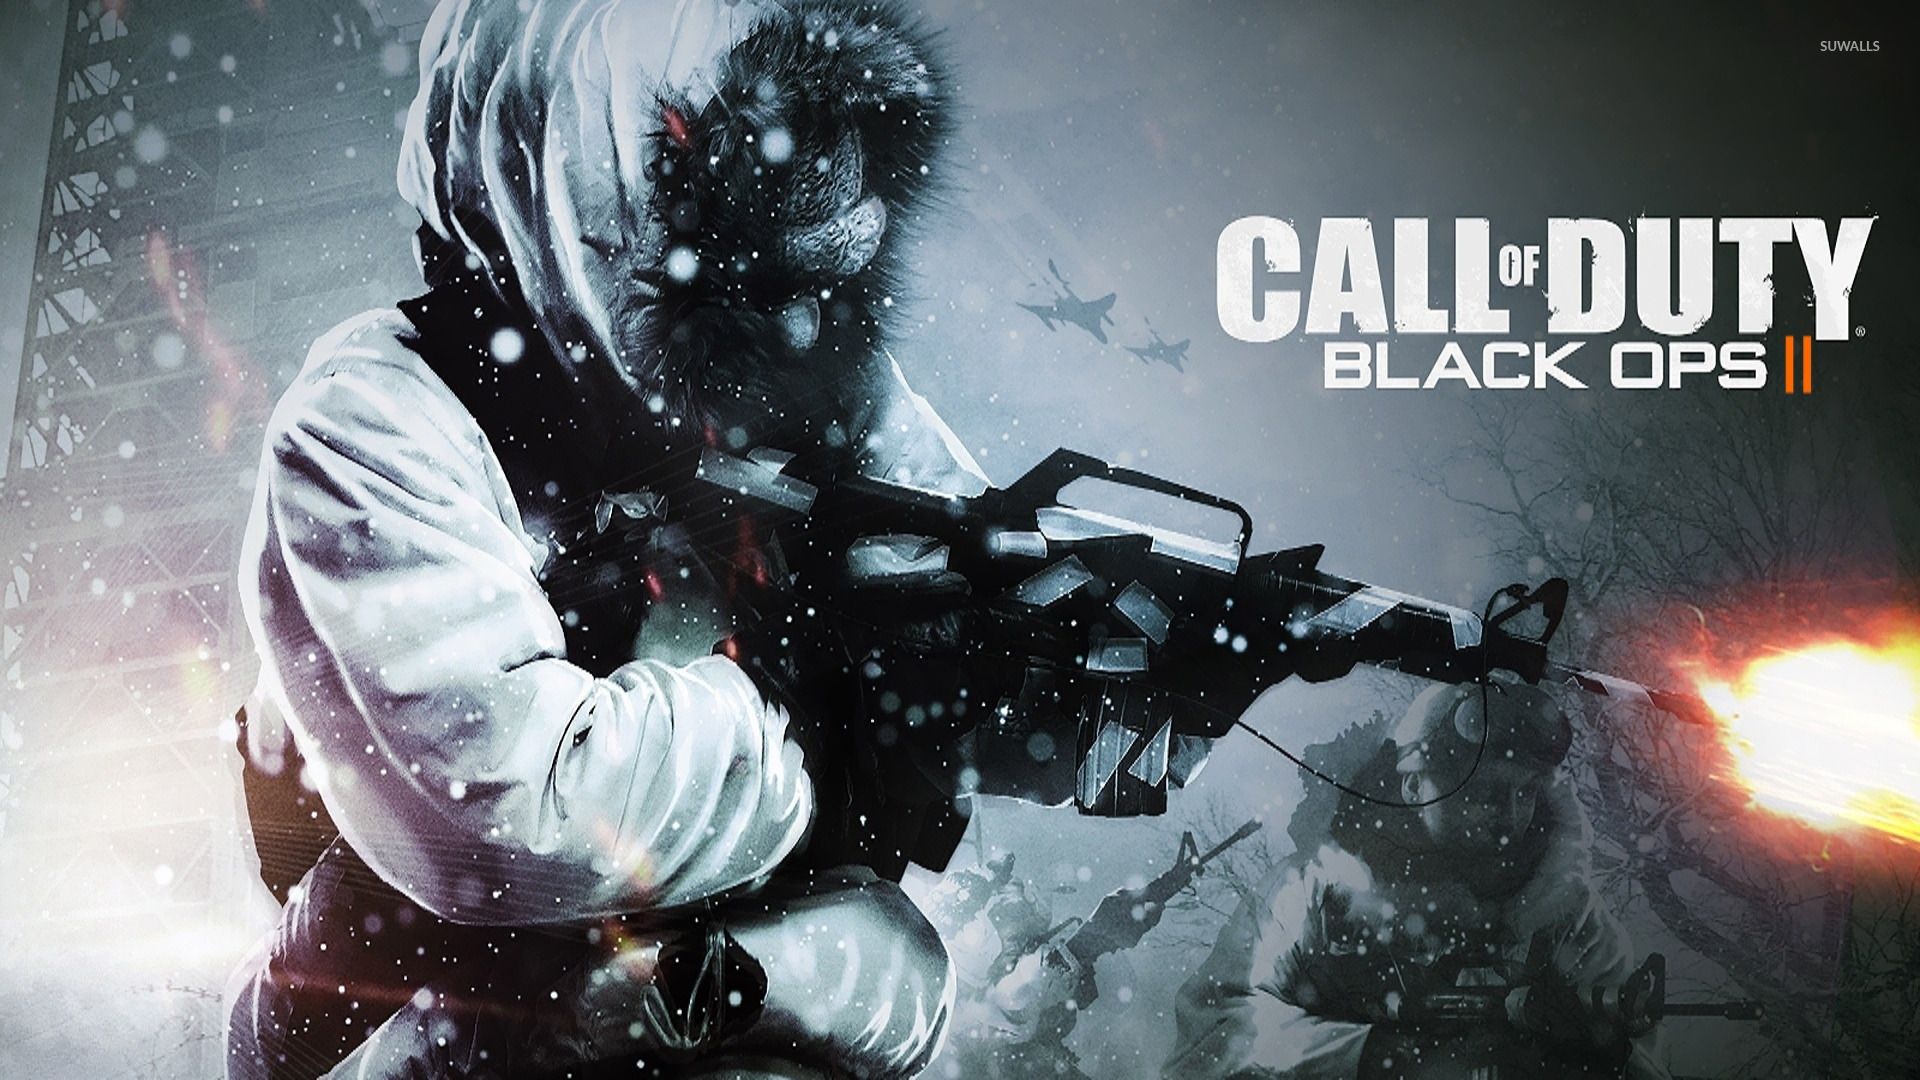 call of duty black ops cold war image